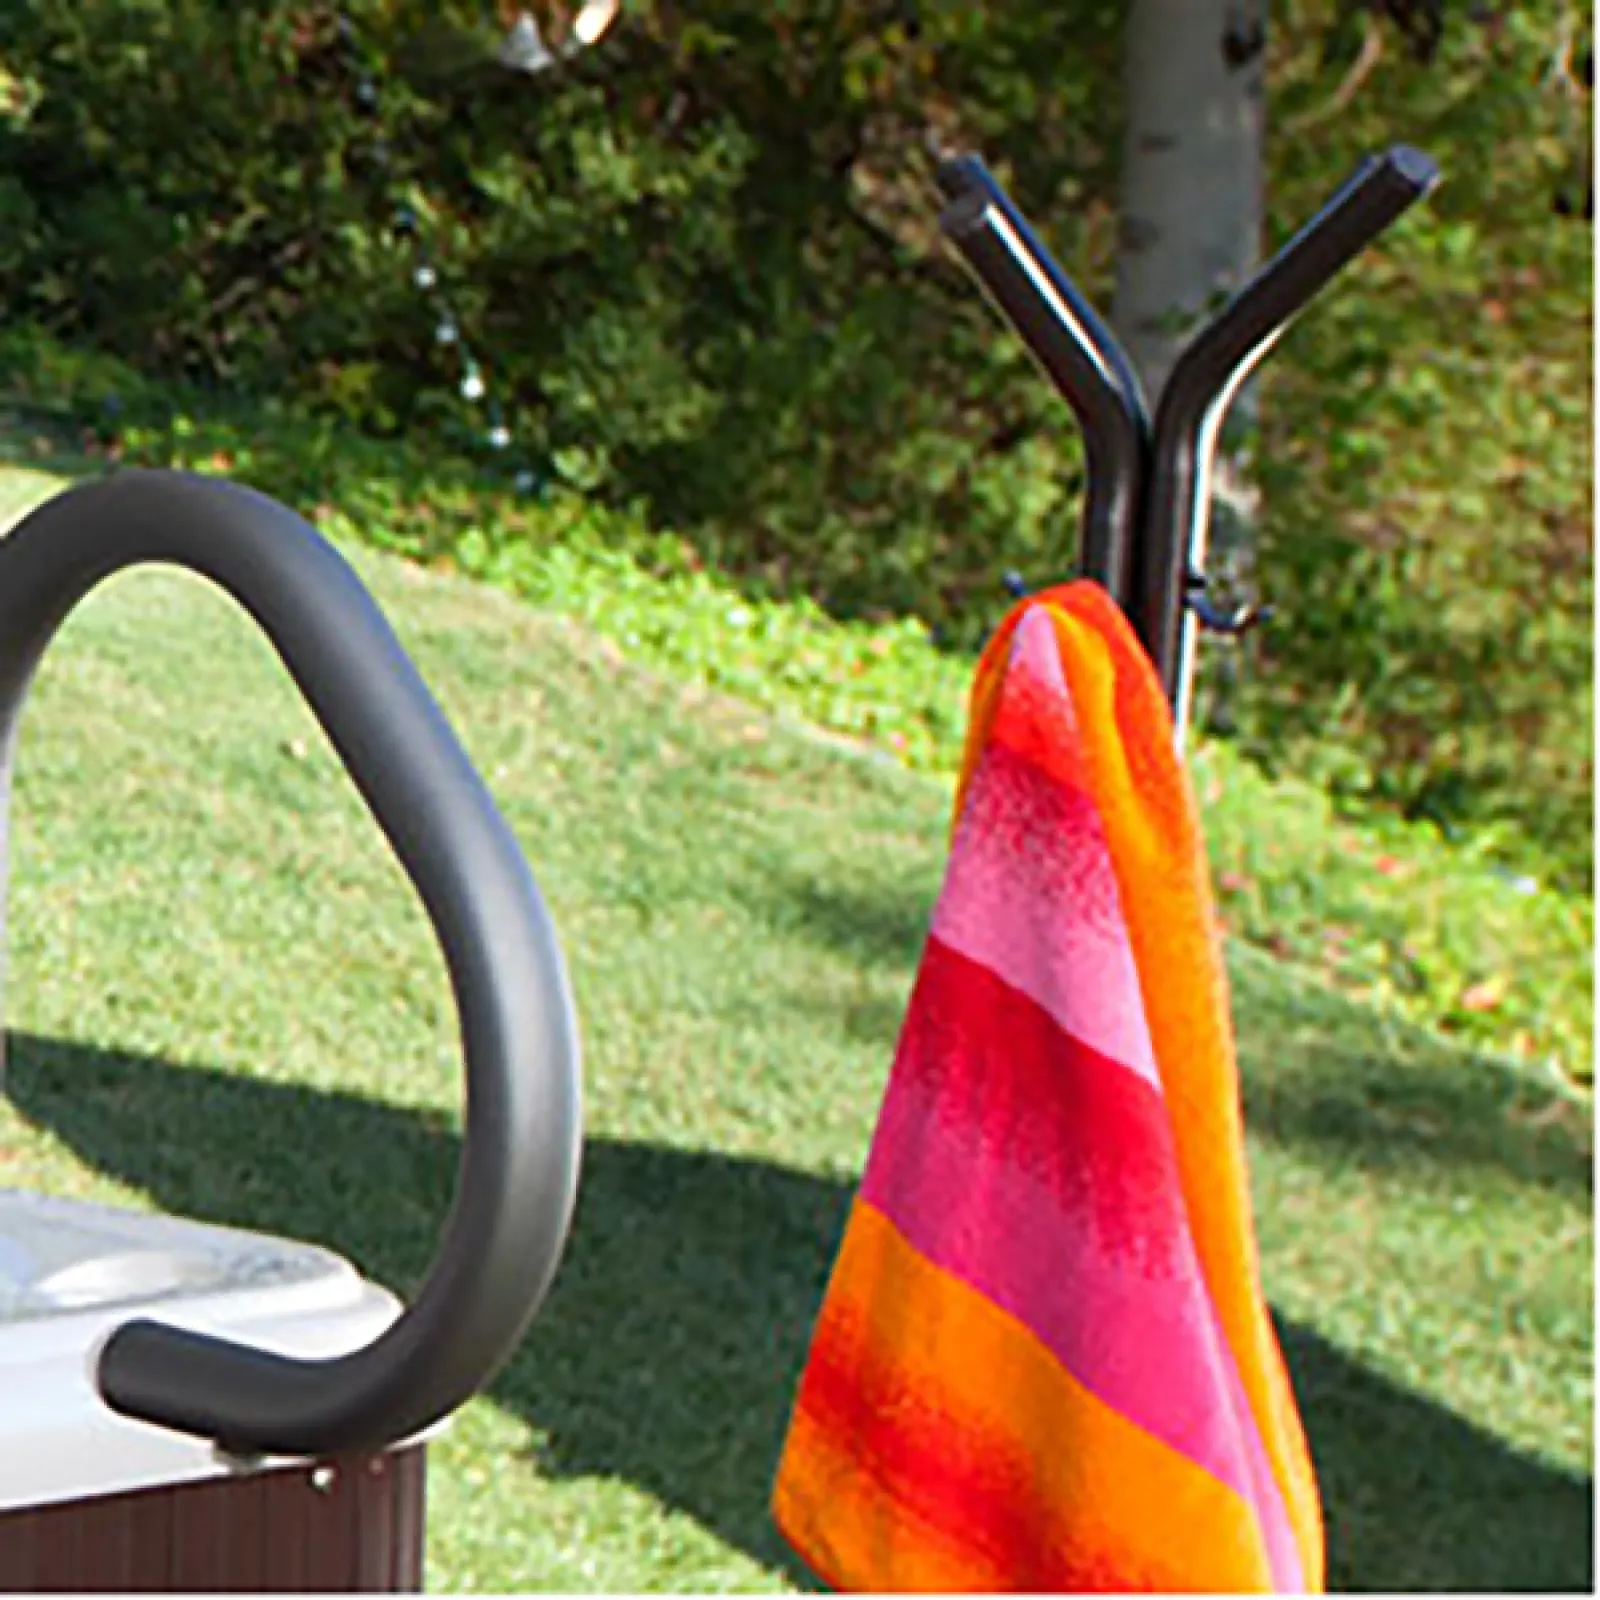 a colorful towel from a metal bar